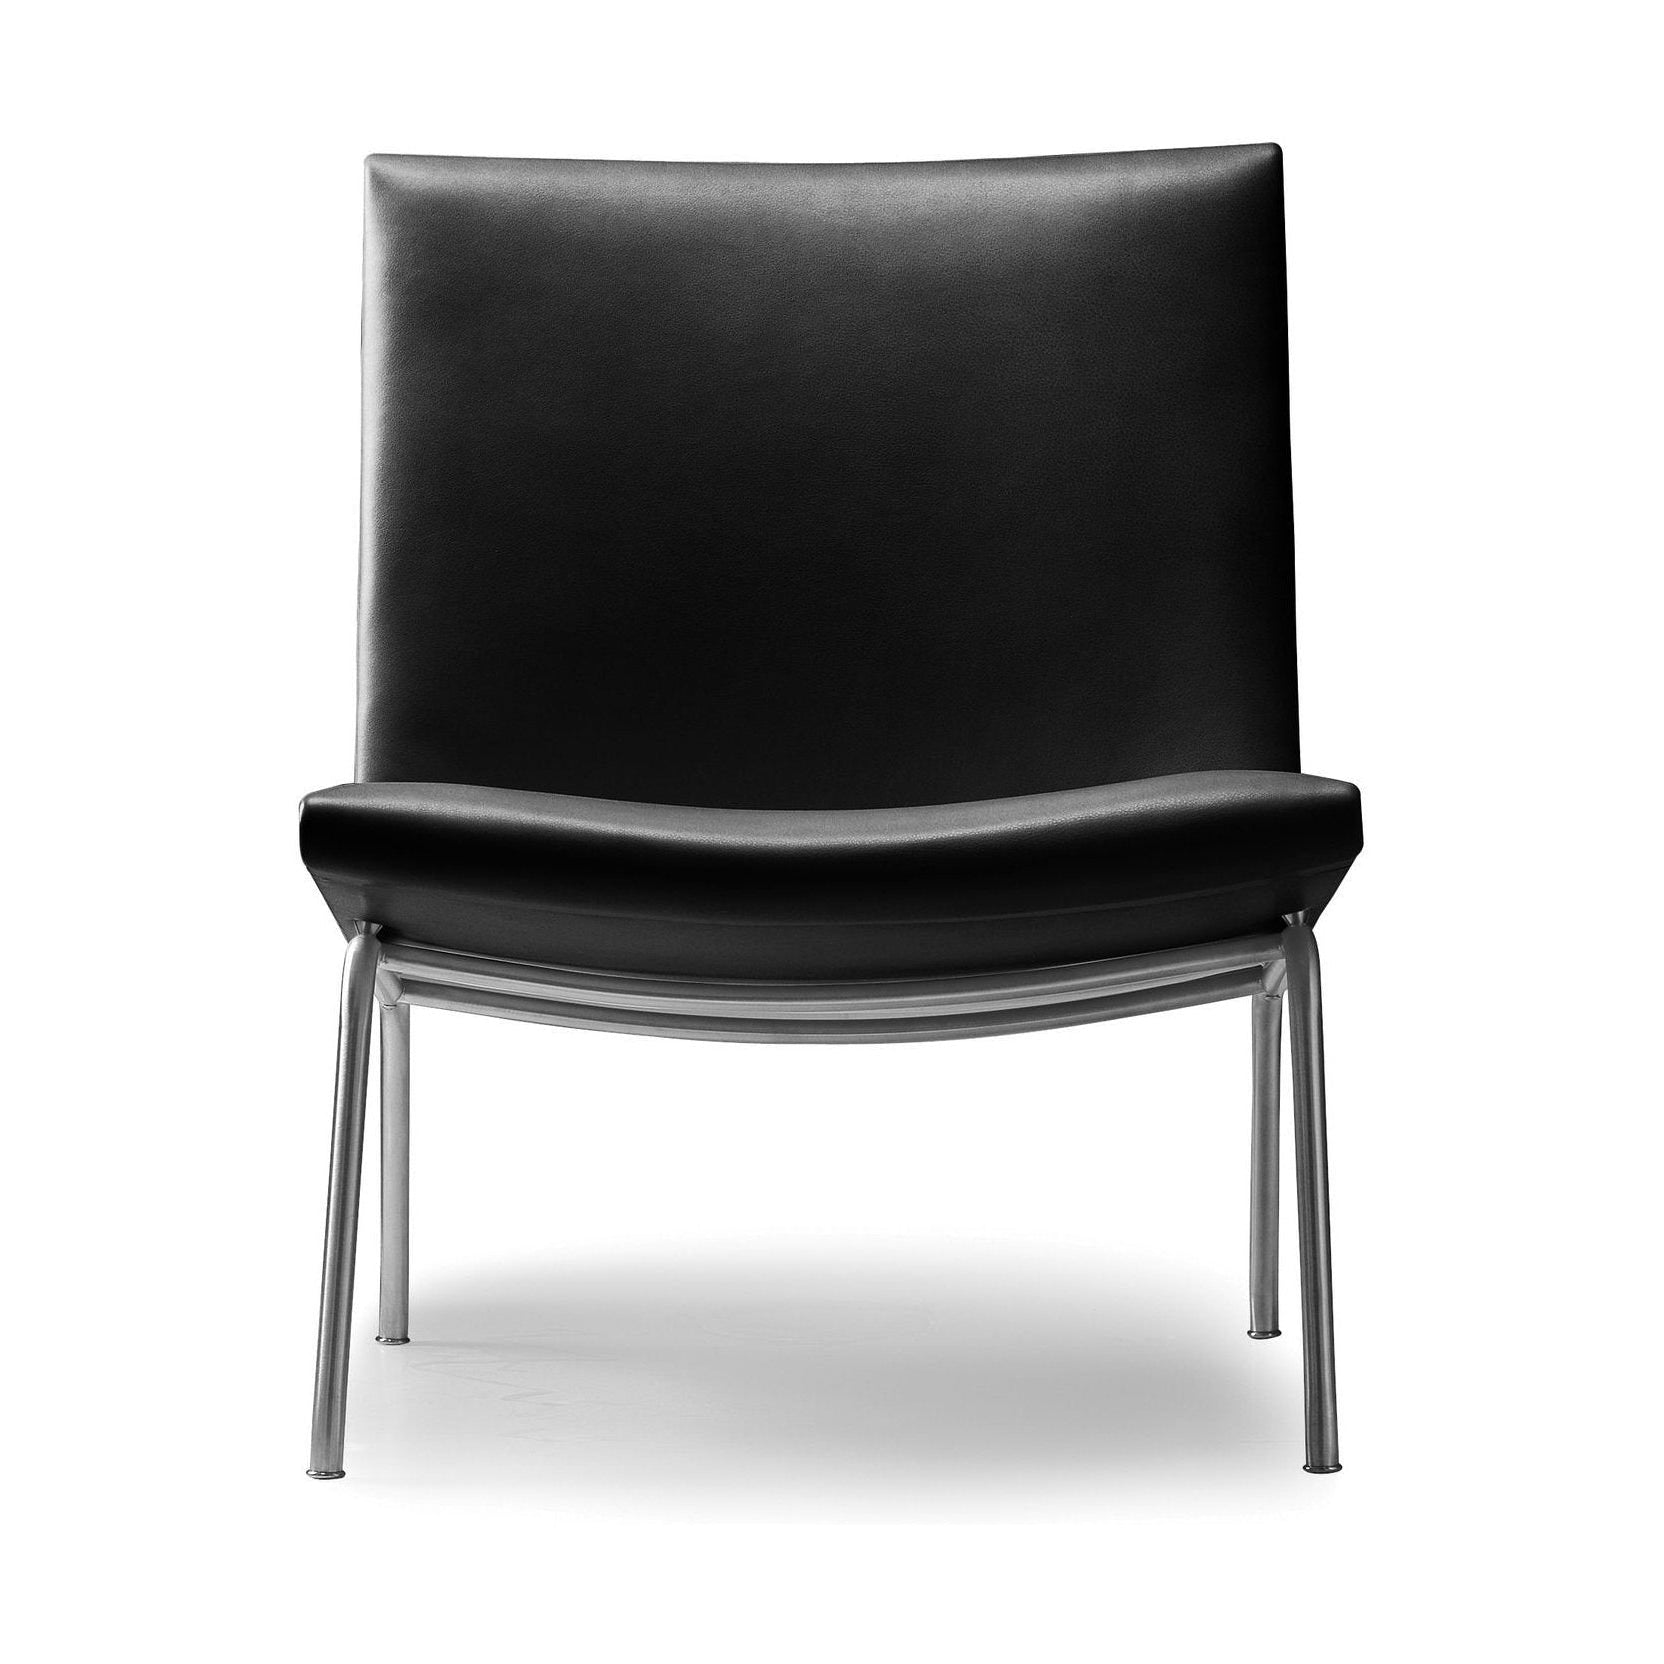 Carl Hansen Ch401 Kastrup Lounge Chair, Stainless Steel/Black Leather Thor 301